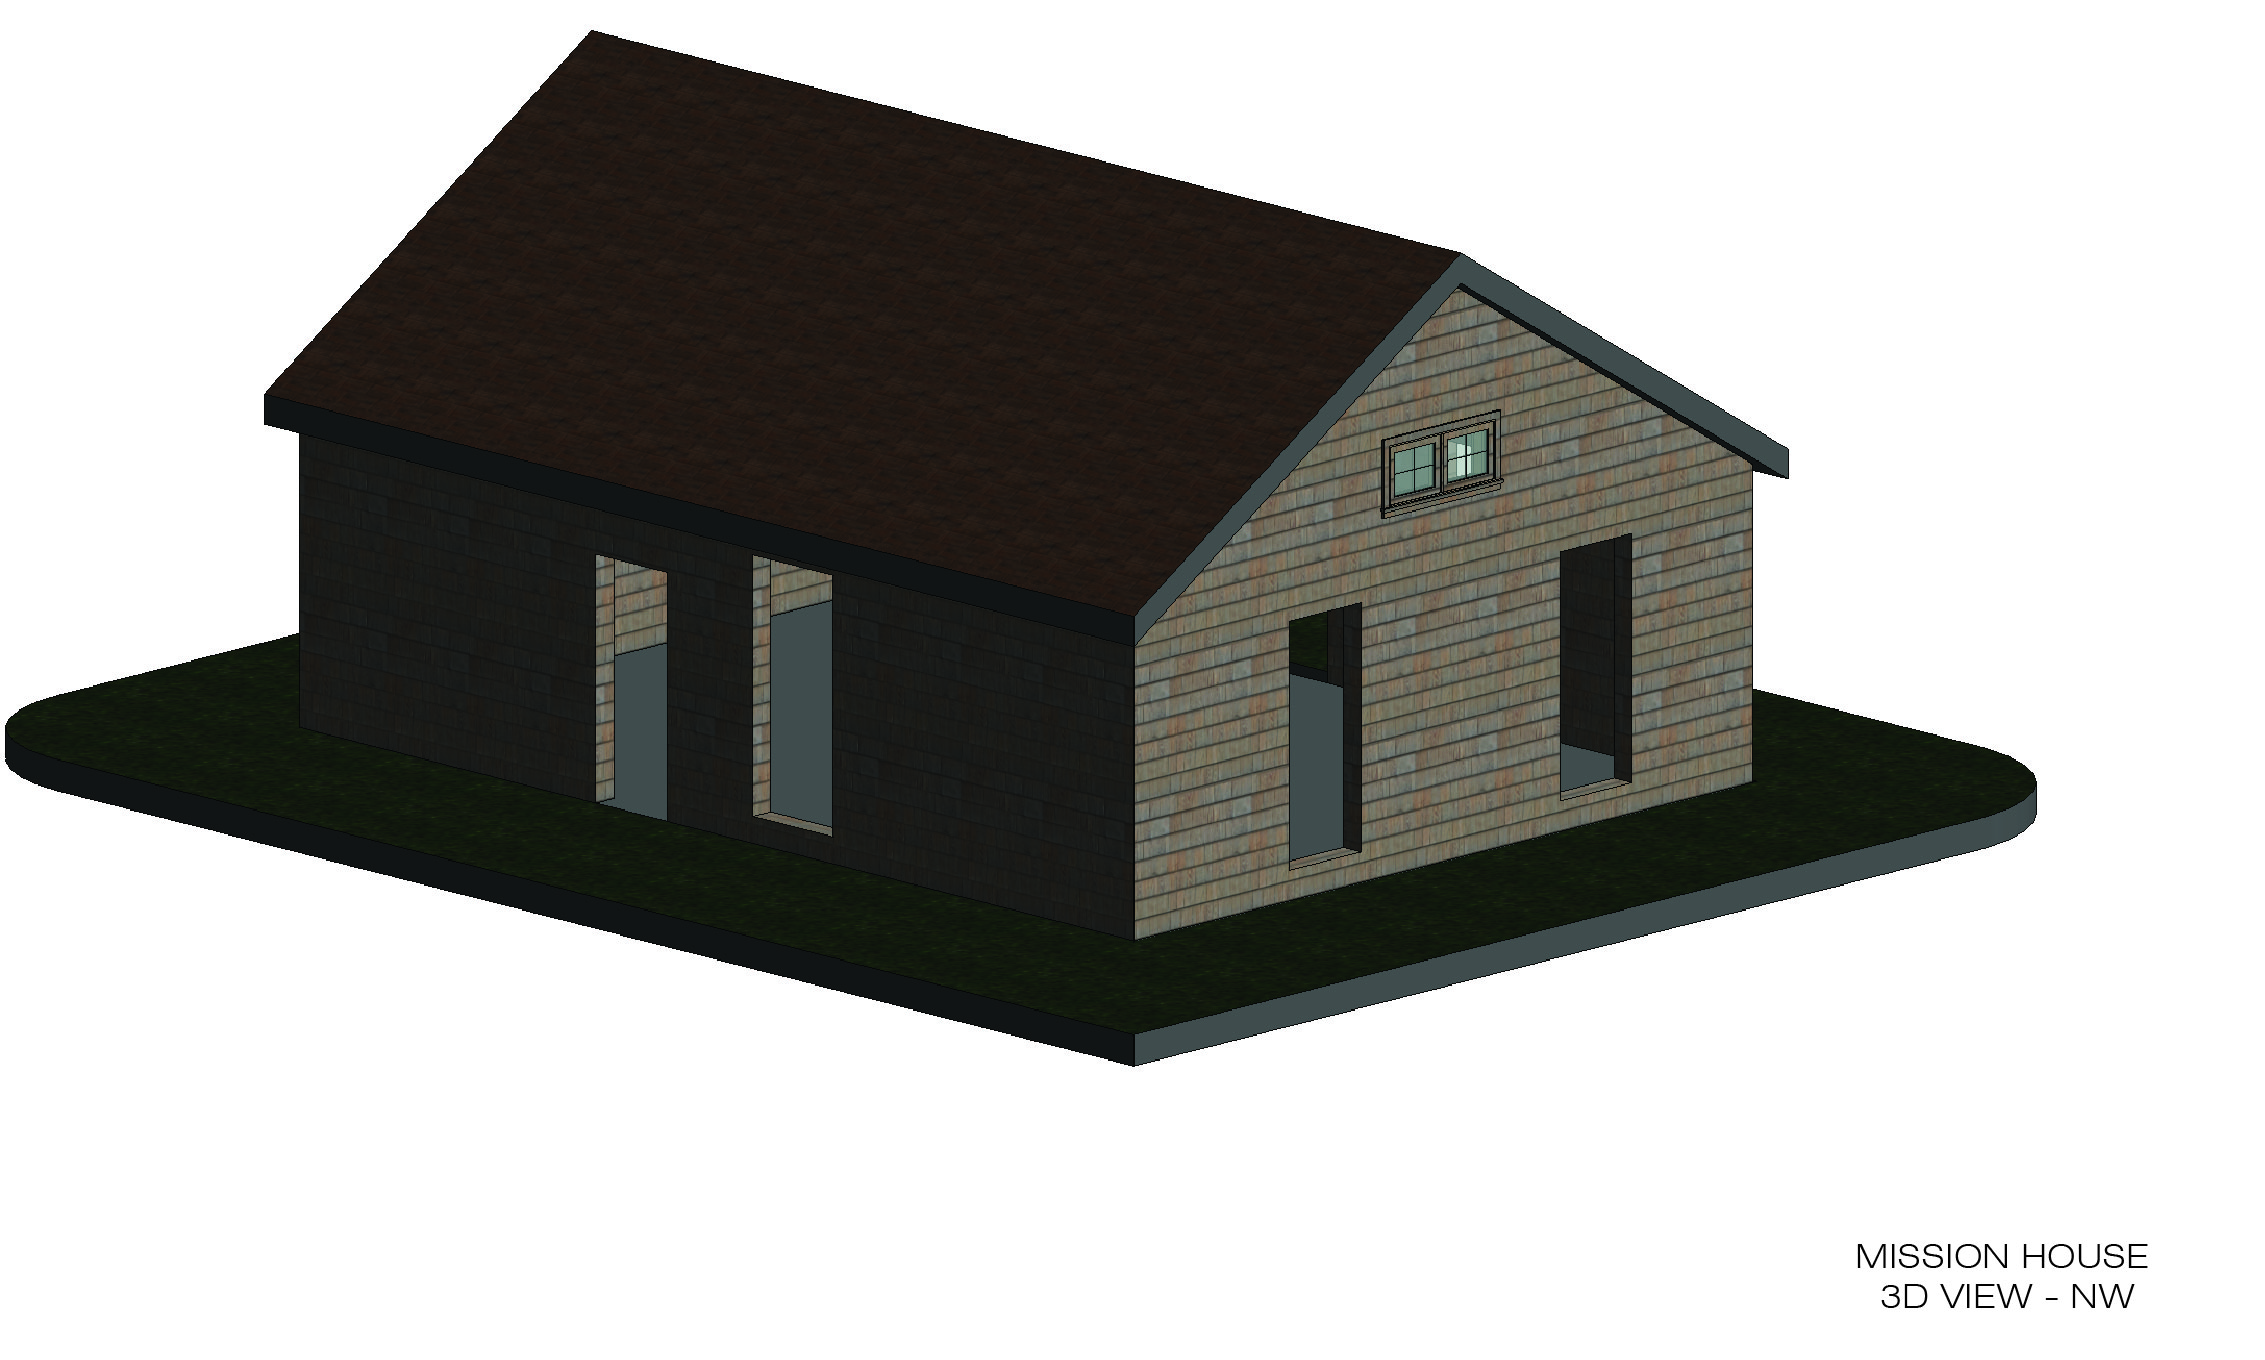 3D view of the northwest corner of the Anglican Mission House